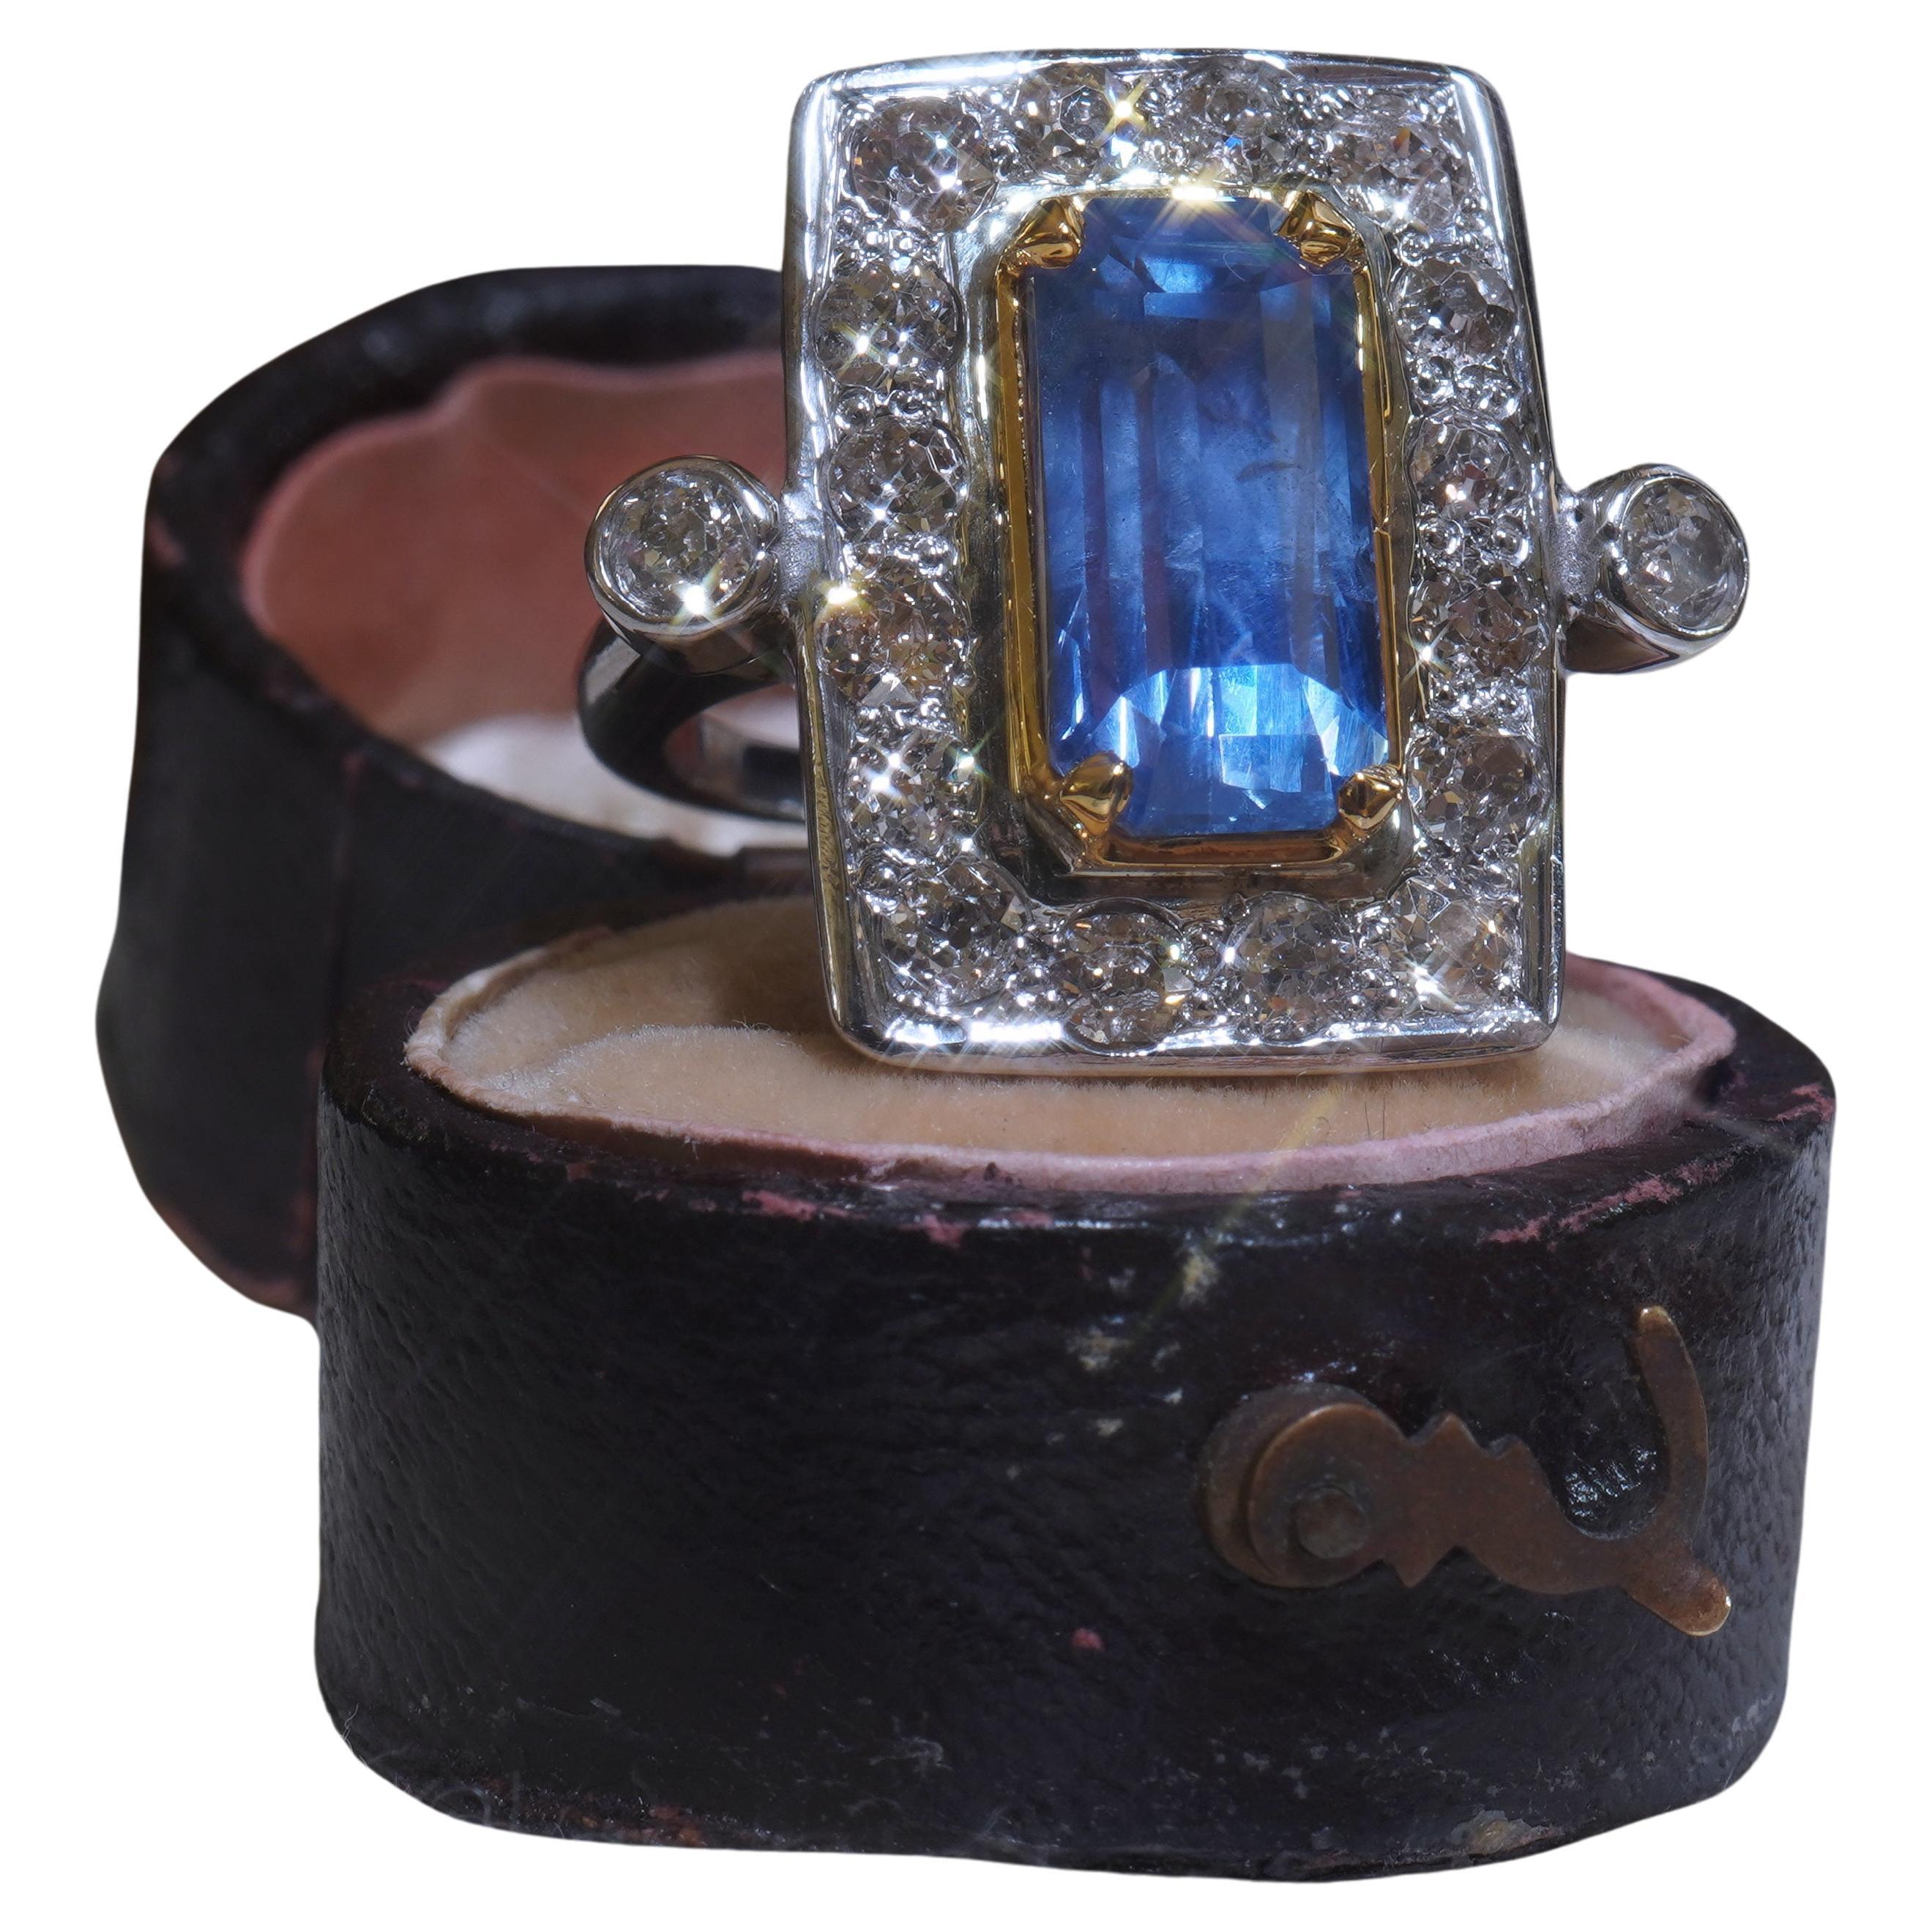 Old South Jewels proudly presents...VINTAGE LUXURY... GIA CERTIFIED PLATINUM & 18K 8.32 CARAT UNHEATED SAPPHIRE DIAMOND ANTIQUE RING AND BOX.   6.23 CARAT TRANSPARENT BLUE GIA CERTIFIED RARE NO HEAT NATURAL CEYLON SAPPHIRE.   (This Gorgeous Vintage